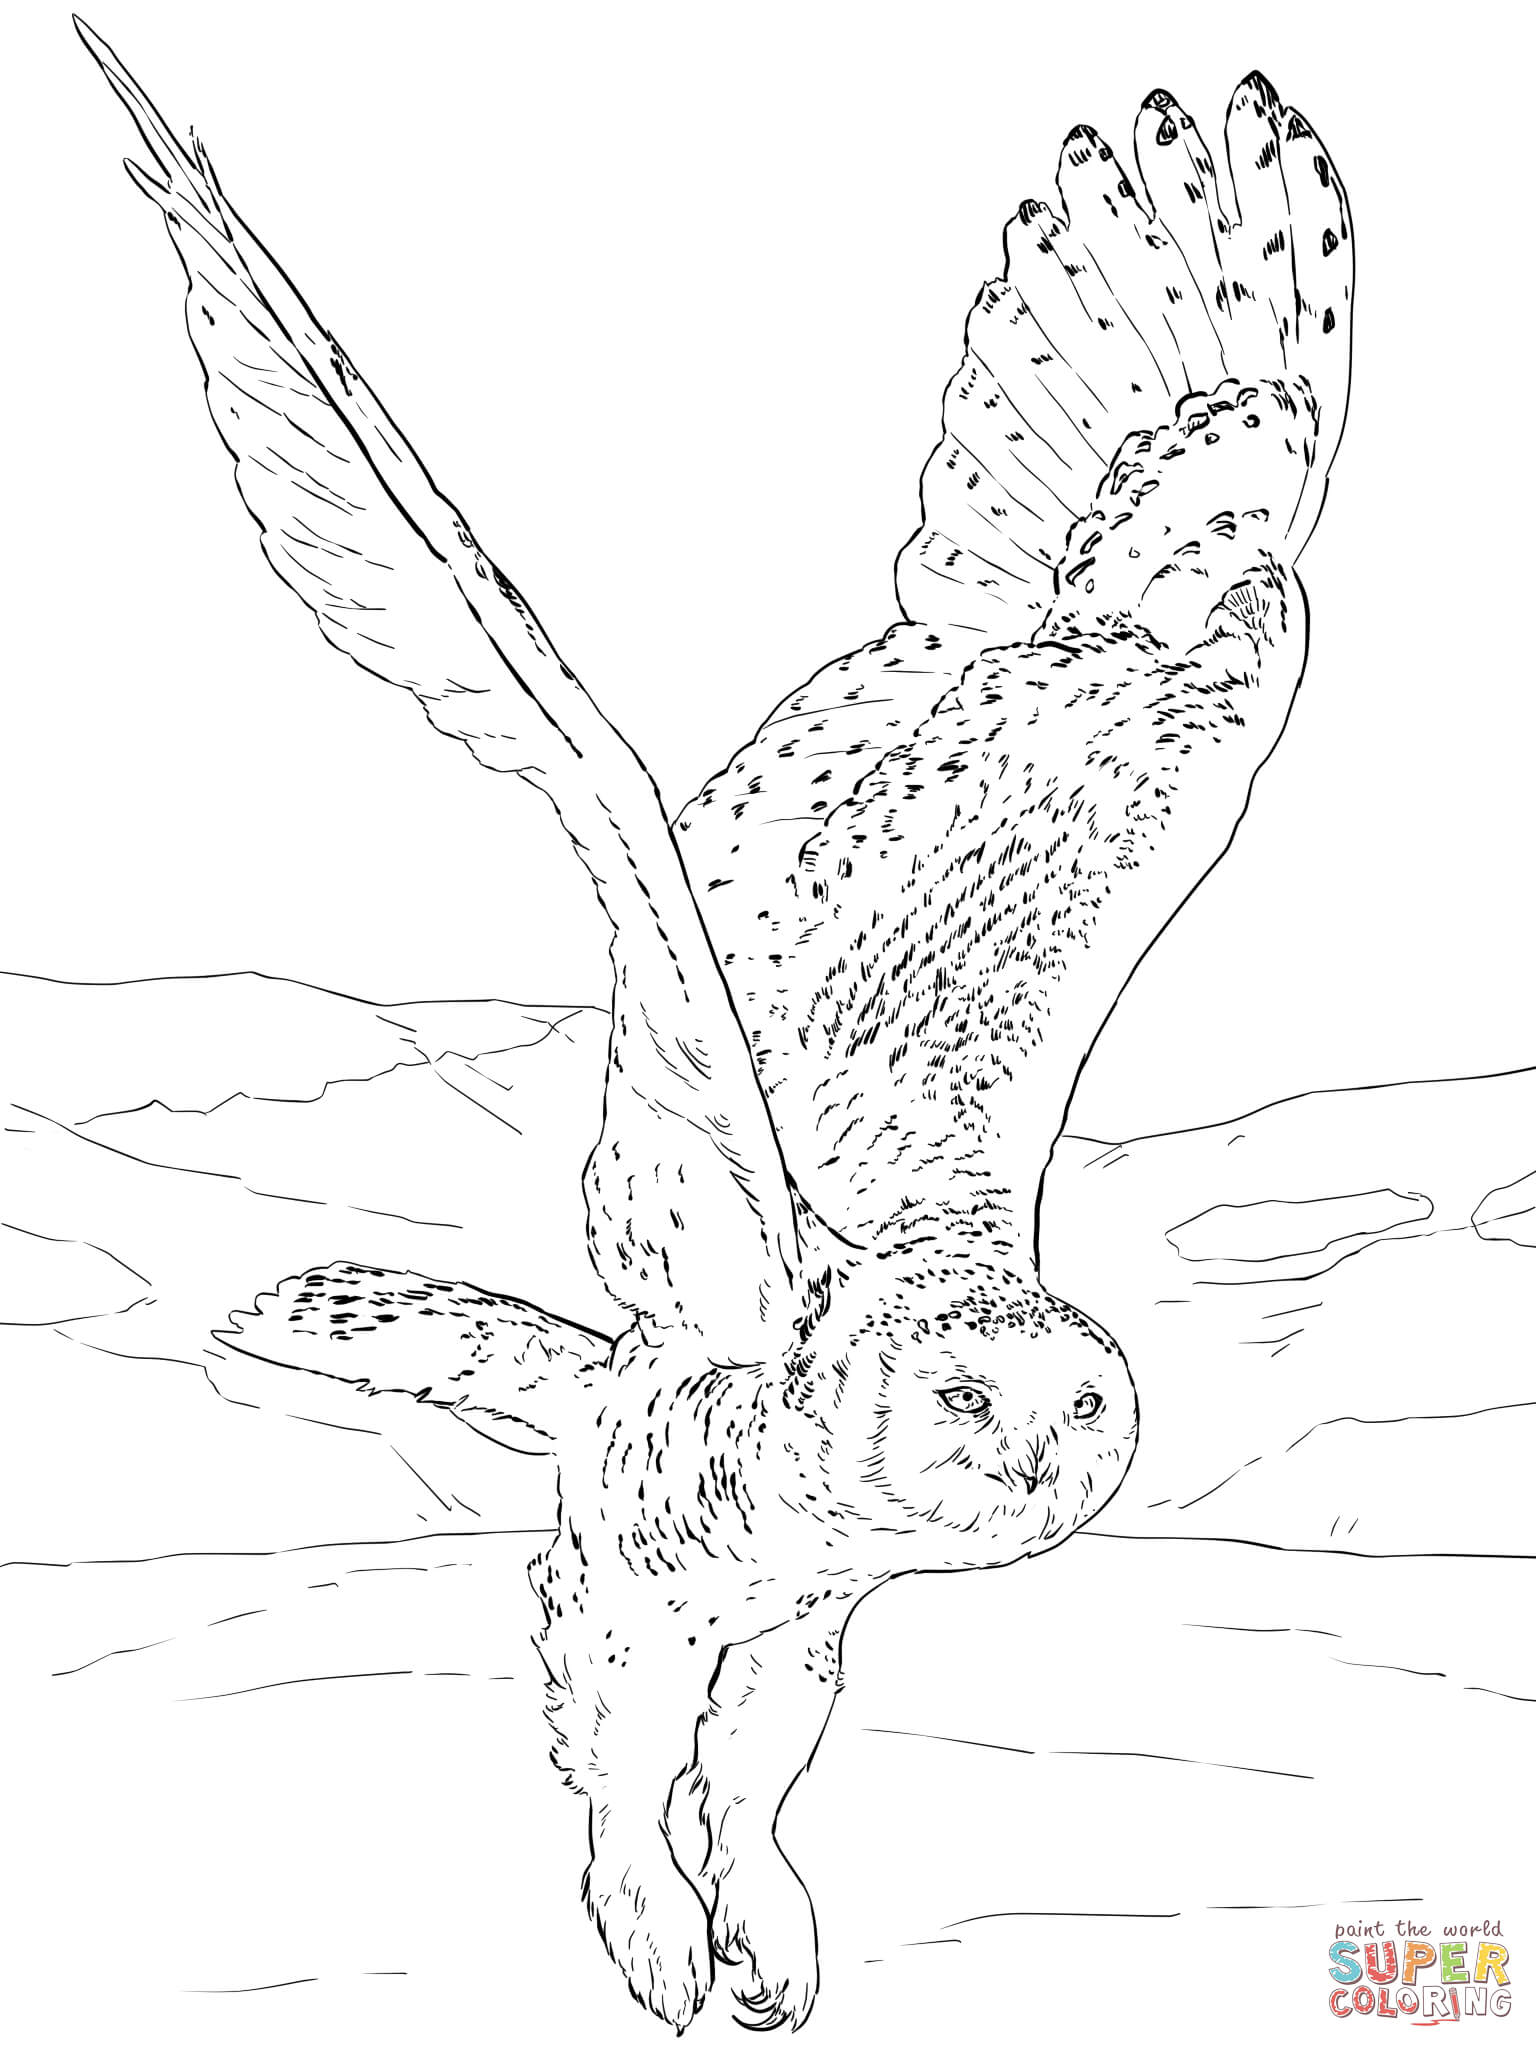 Owls coloring pages | Free Coloring Pages